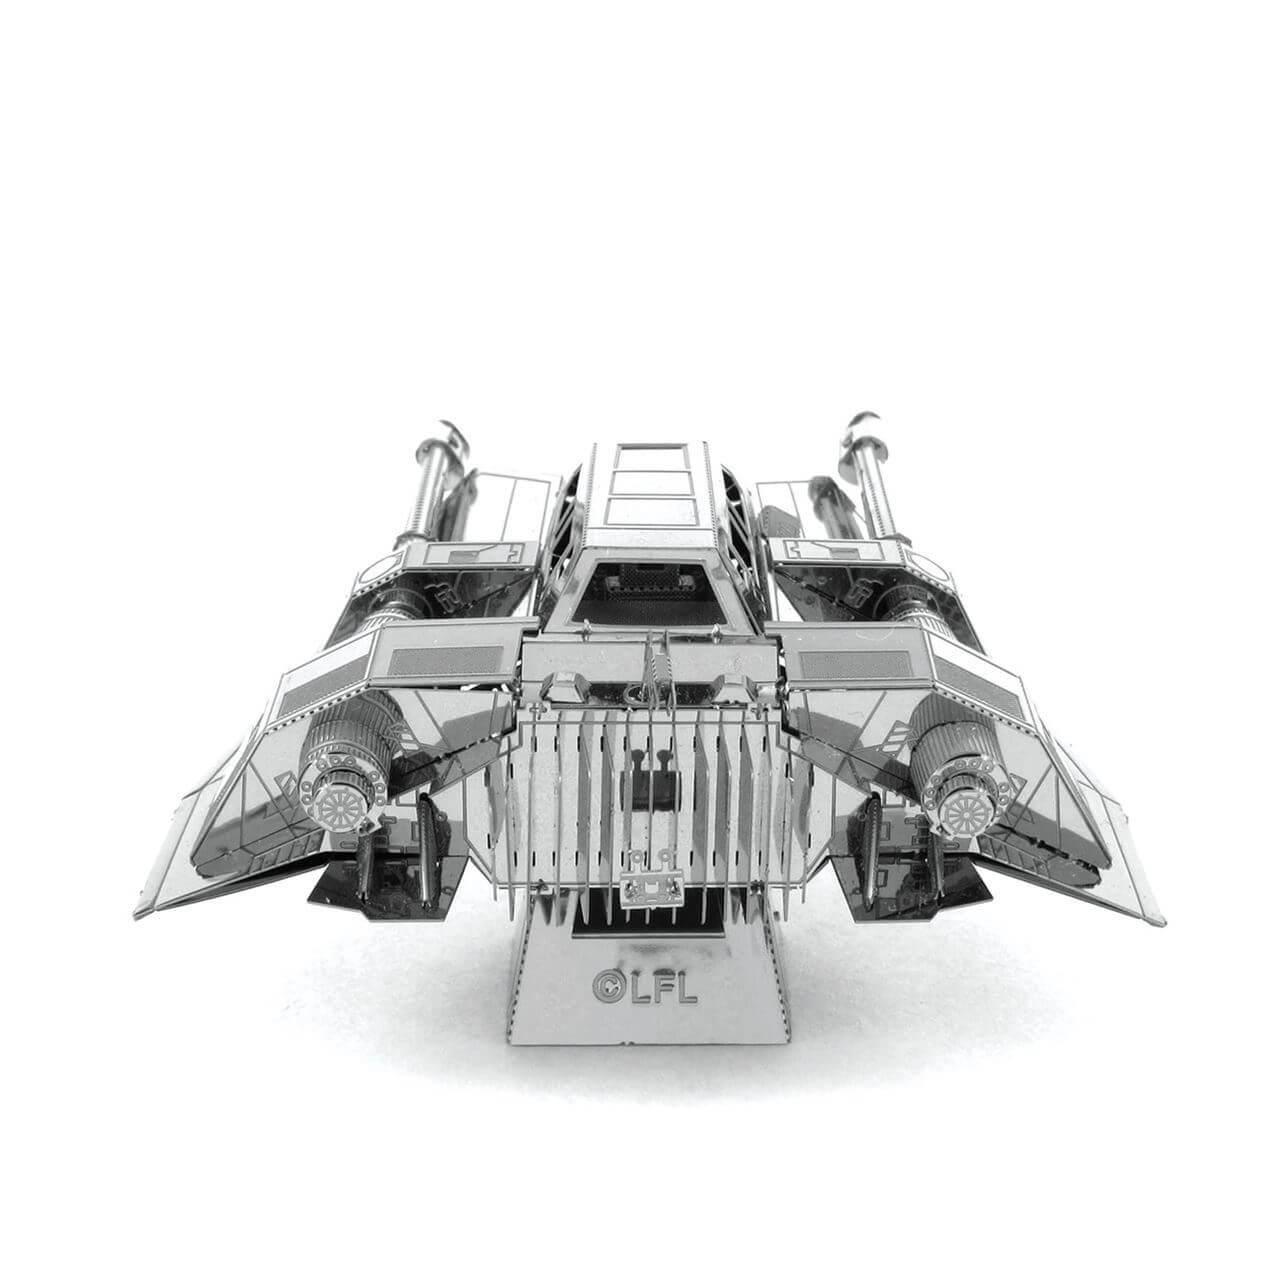 Back view of the metal spaceship.